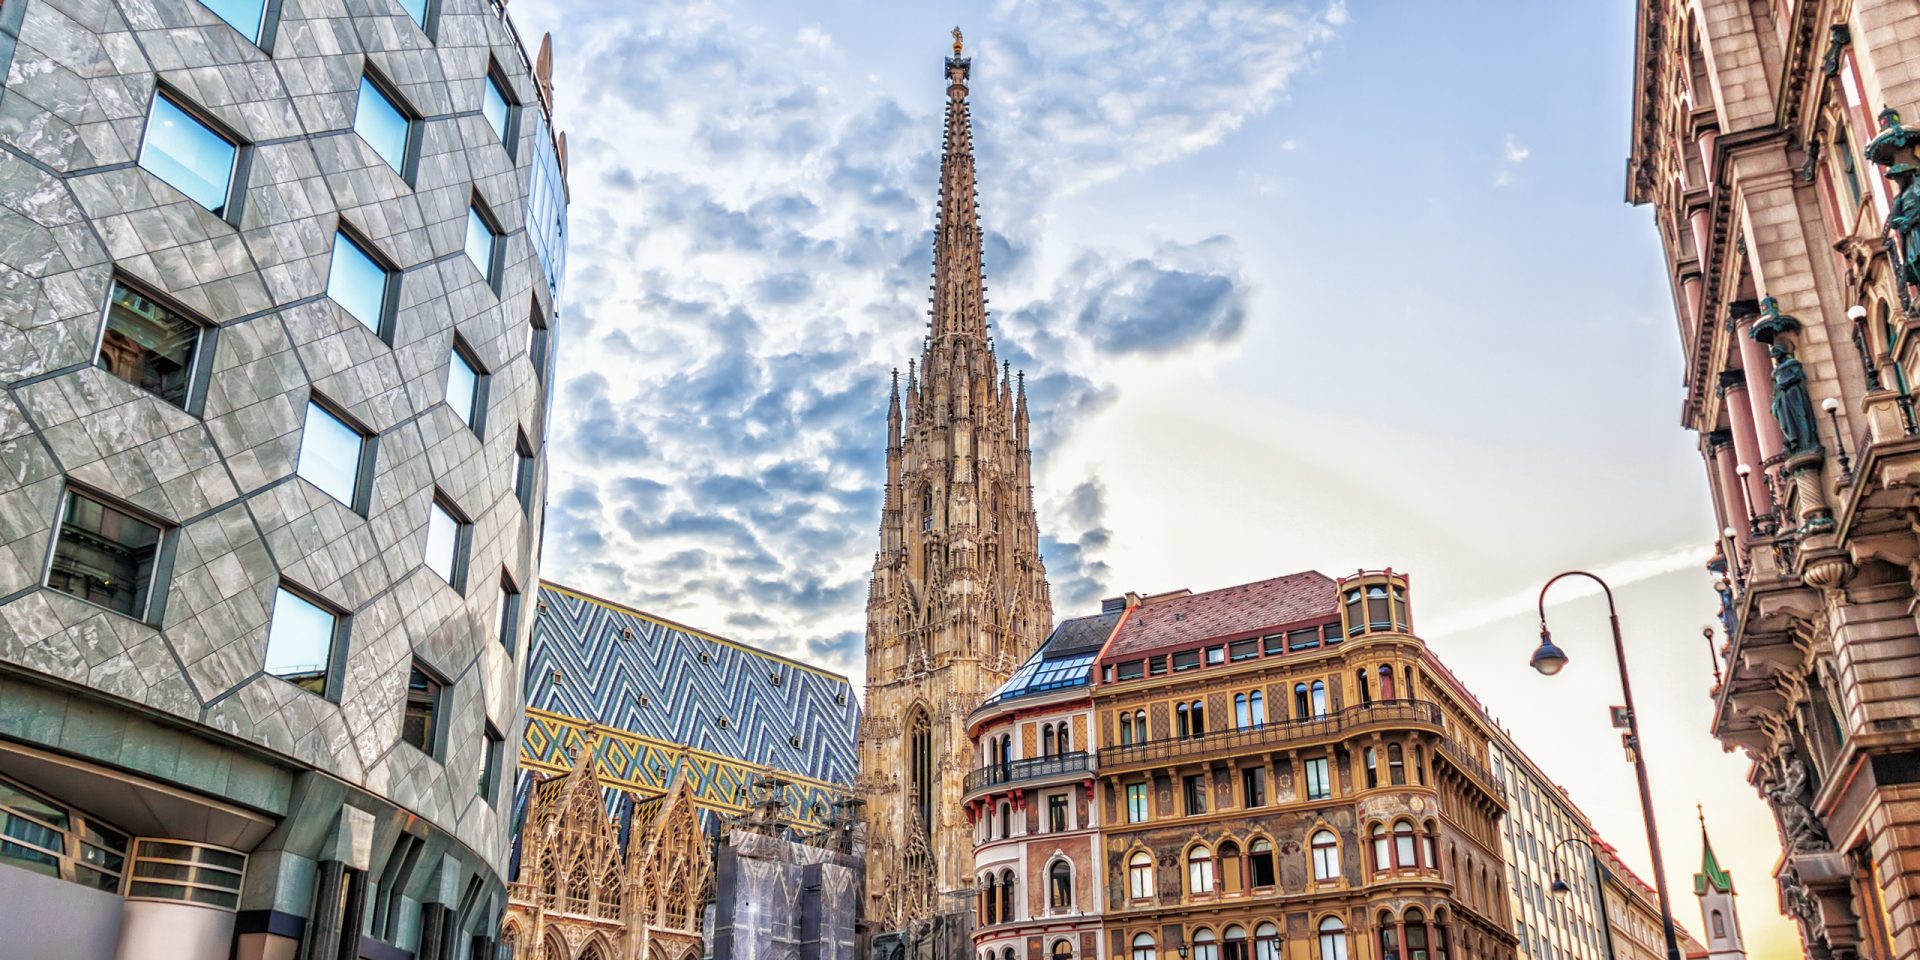 The photo shows St. Stephen's Cathedral in Vienna.